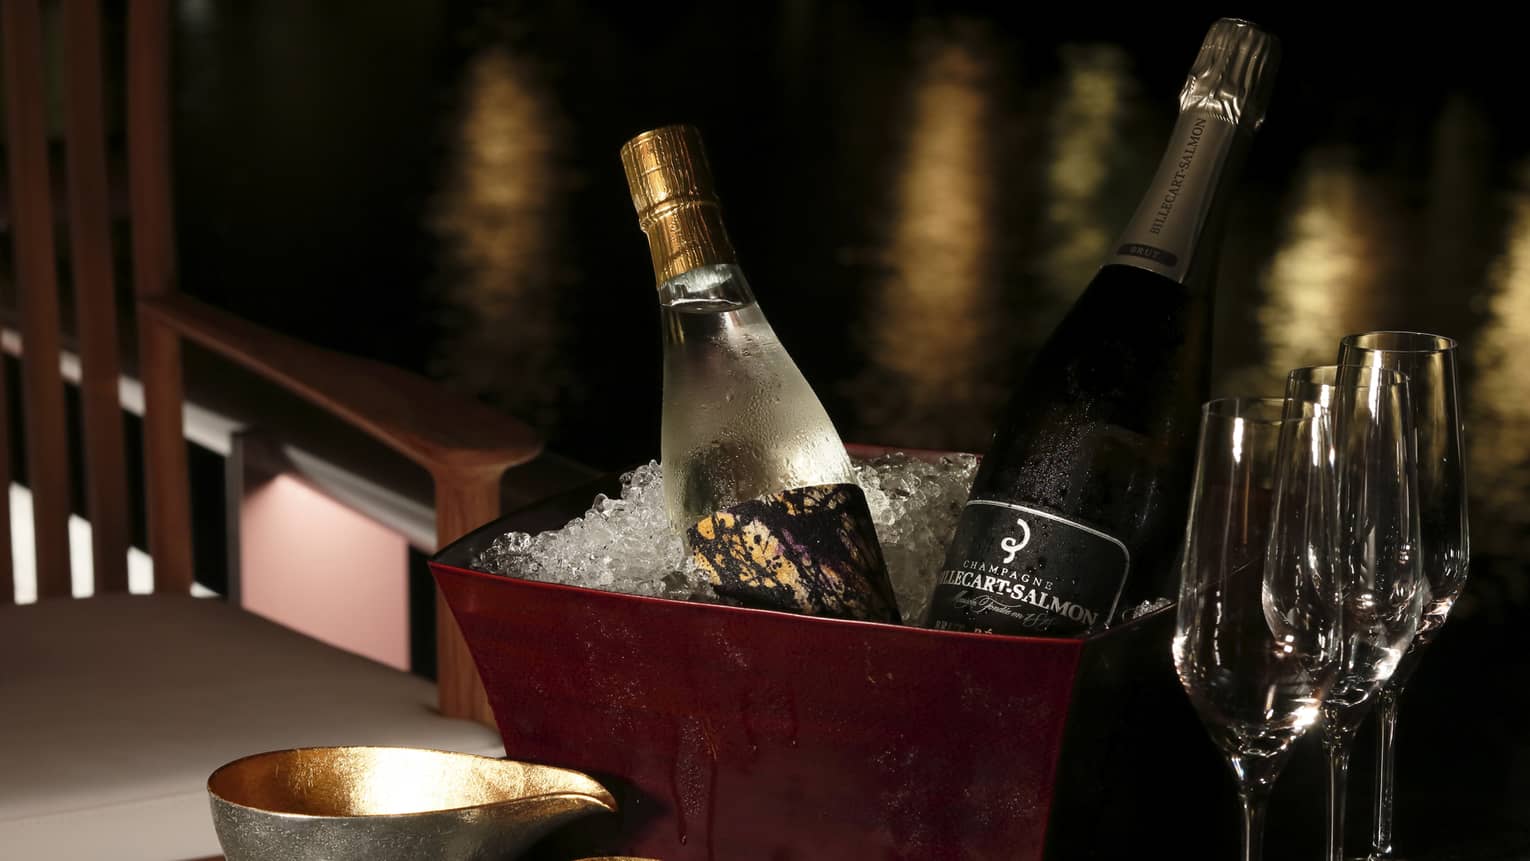 Bottles of sake and Champagne in brown ice bucket on table with glasses